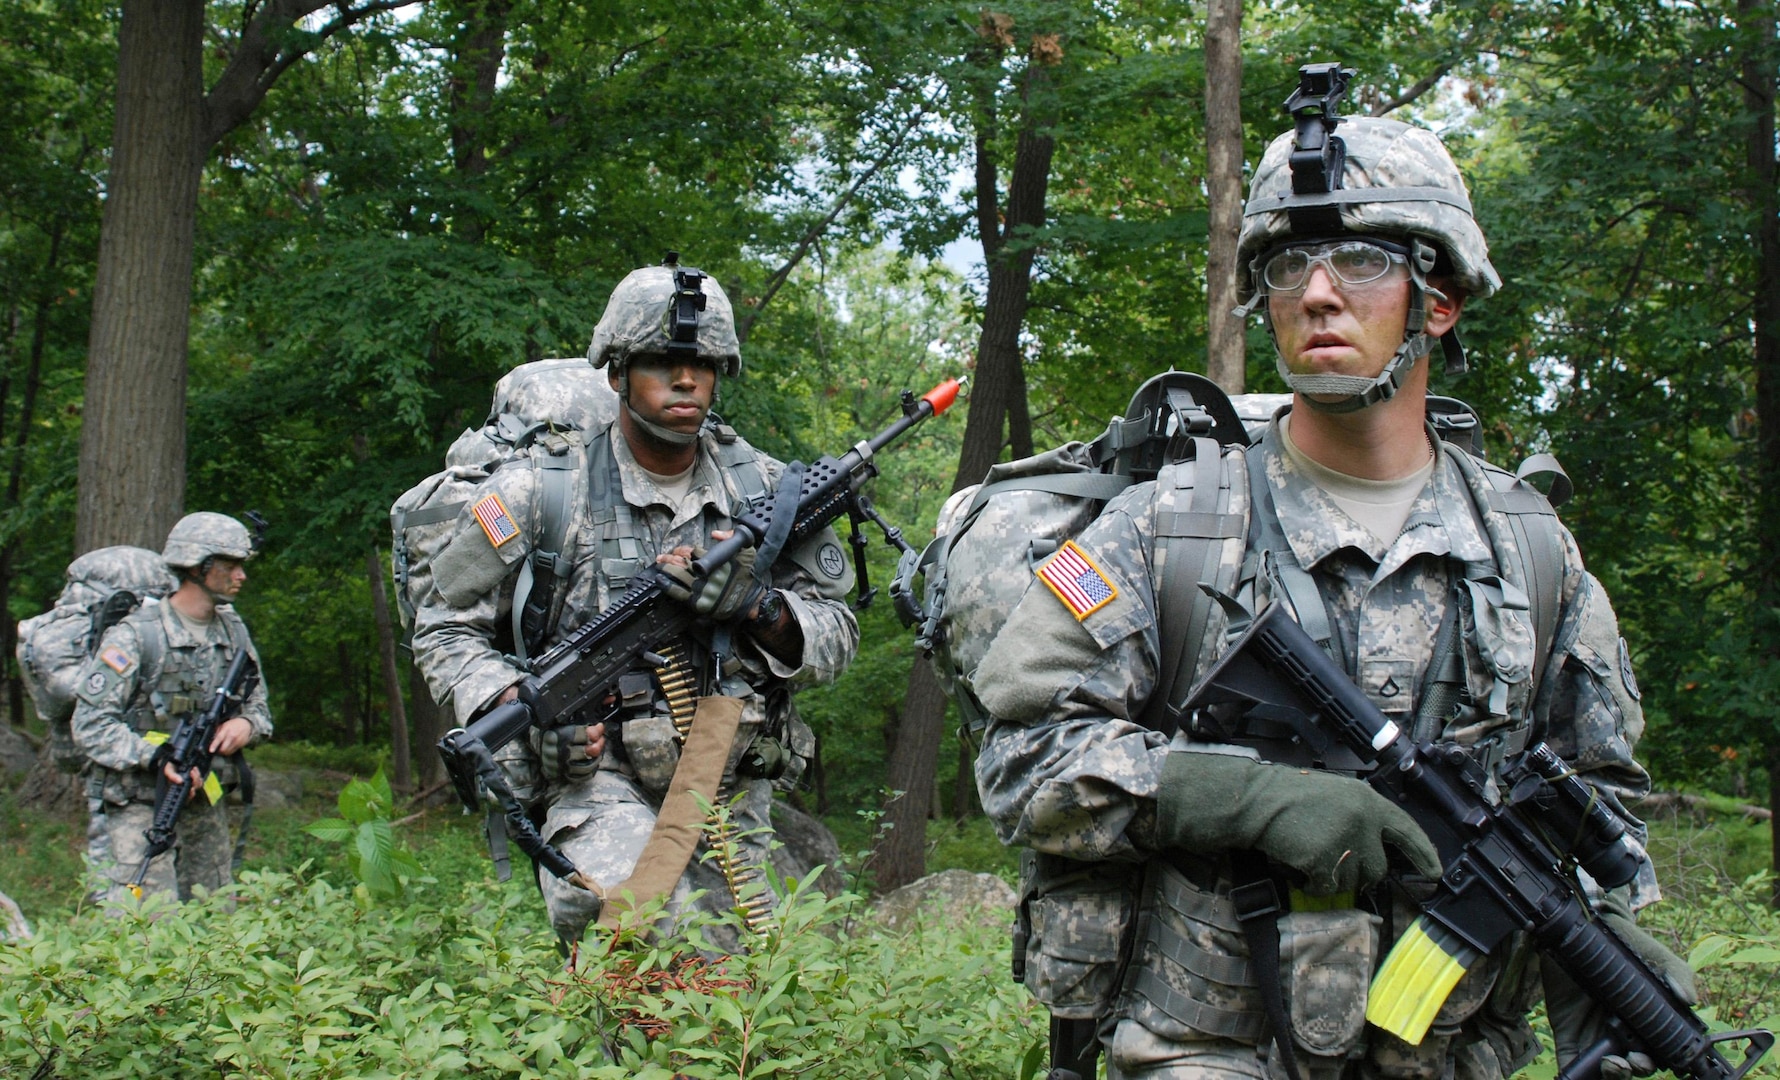 Spc. John Daras, right, Spc. Benjamin Lewis, center, and Spc. Joe Golonka, left, assault a simulated enemy position at the New York Army National Guard's annual Infantryman Transition Course Aug. 7, 2013.